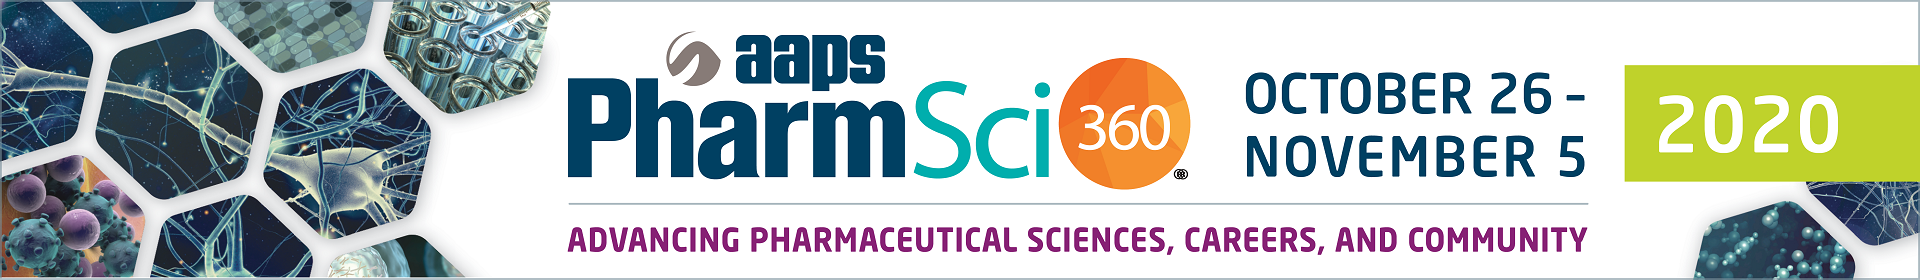 2020 AAPS PharmSci 360  Event Banner